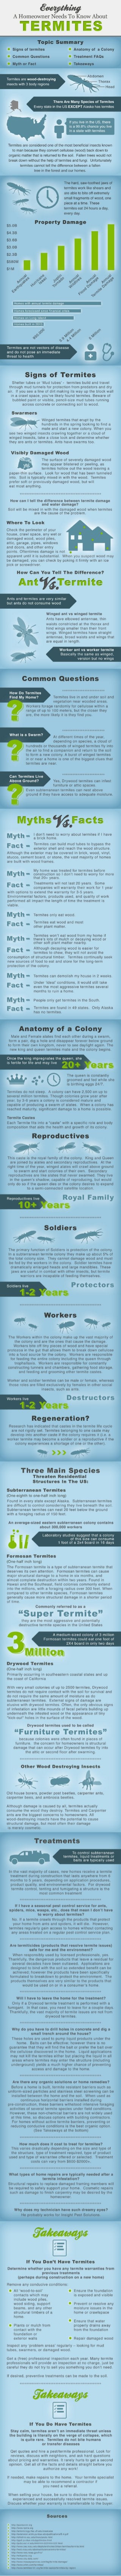 Termite Infographic - Everything A Homeowner Needs To Know About Termites